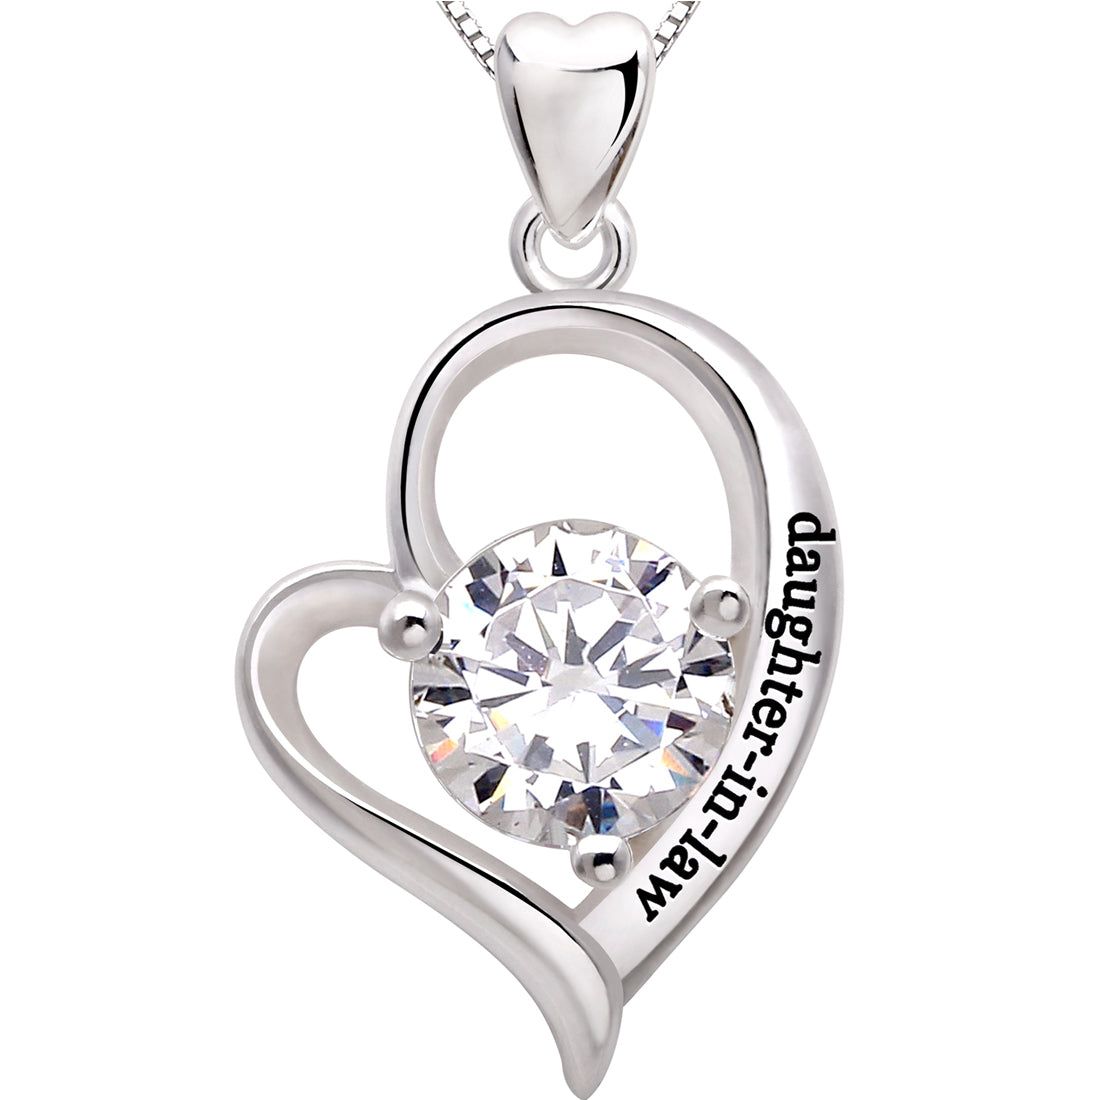 ALOV Jewelry Sterling Silver "daughter-in-law" Love Heart Cubic Zirconia Pendant Necklace